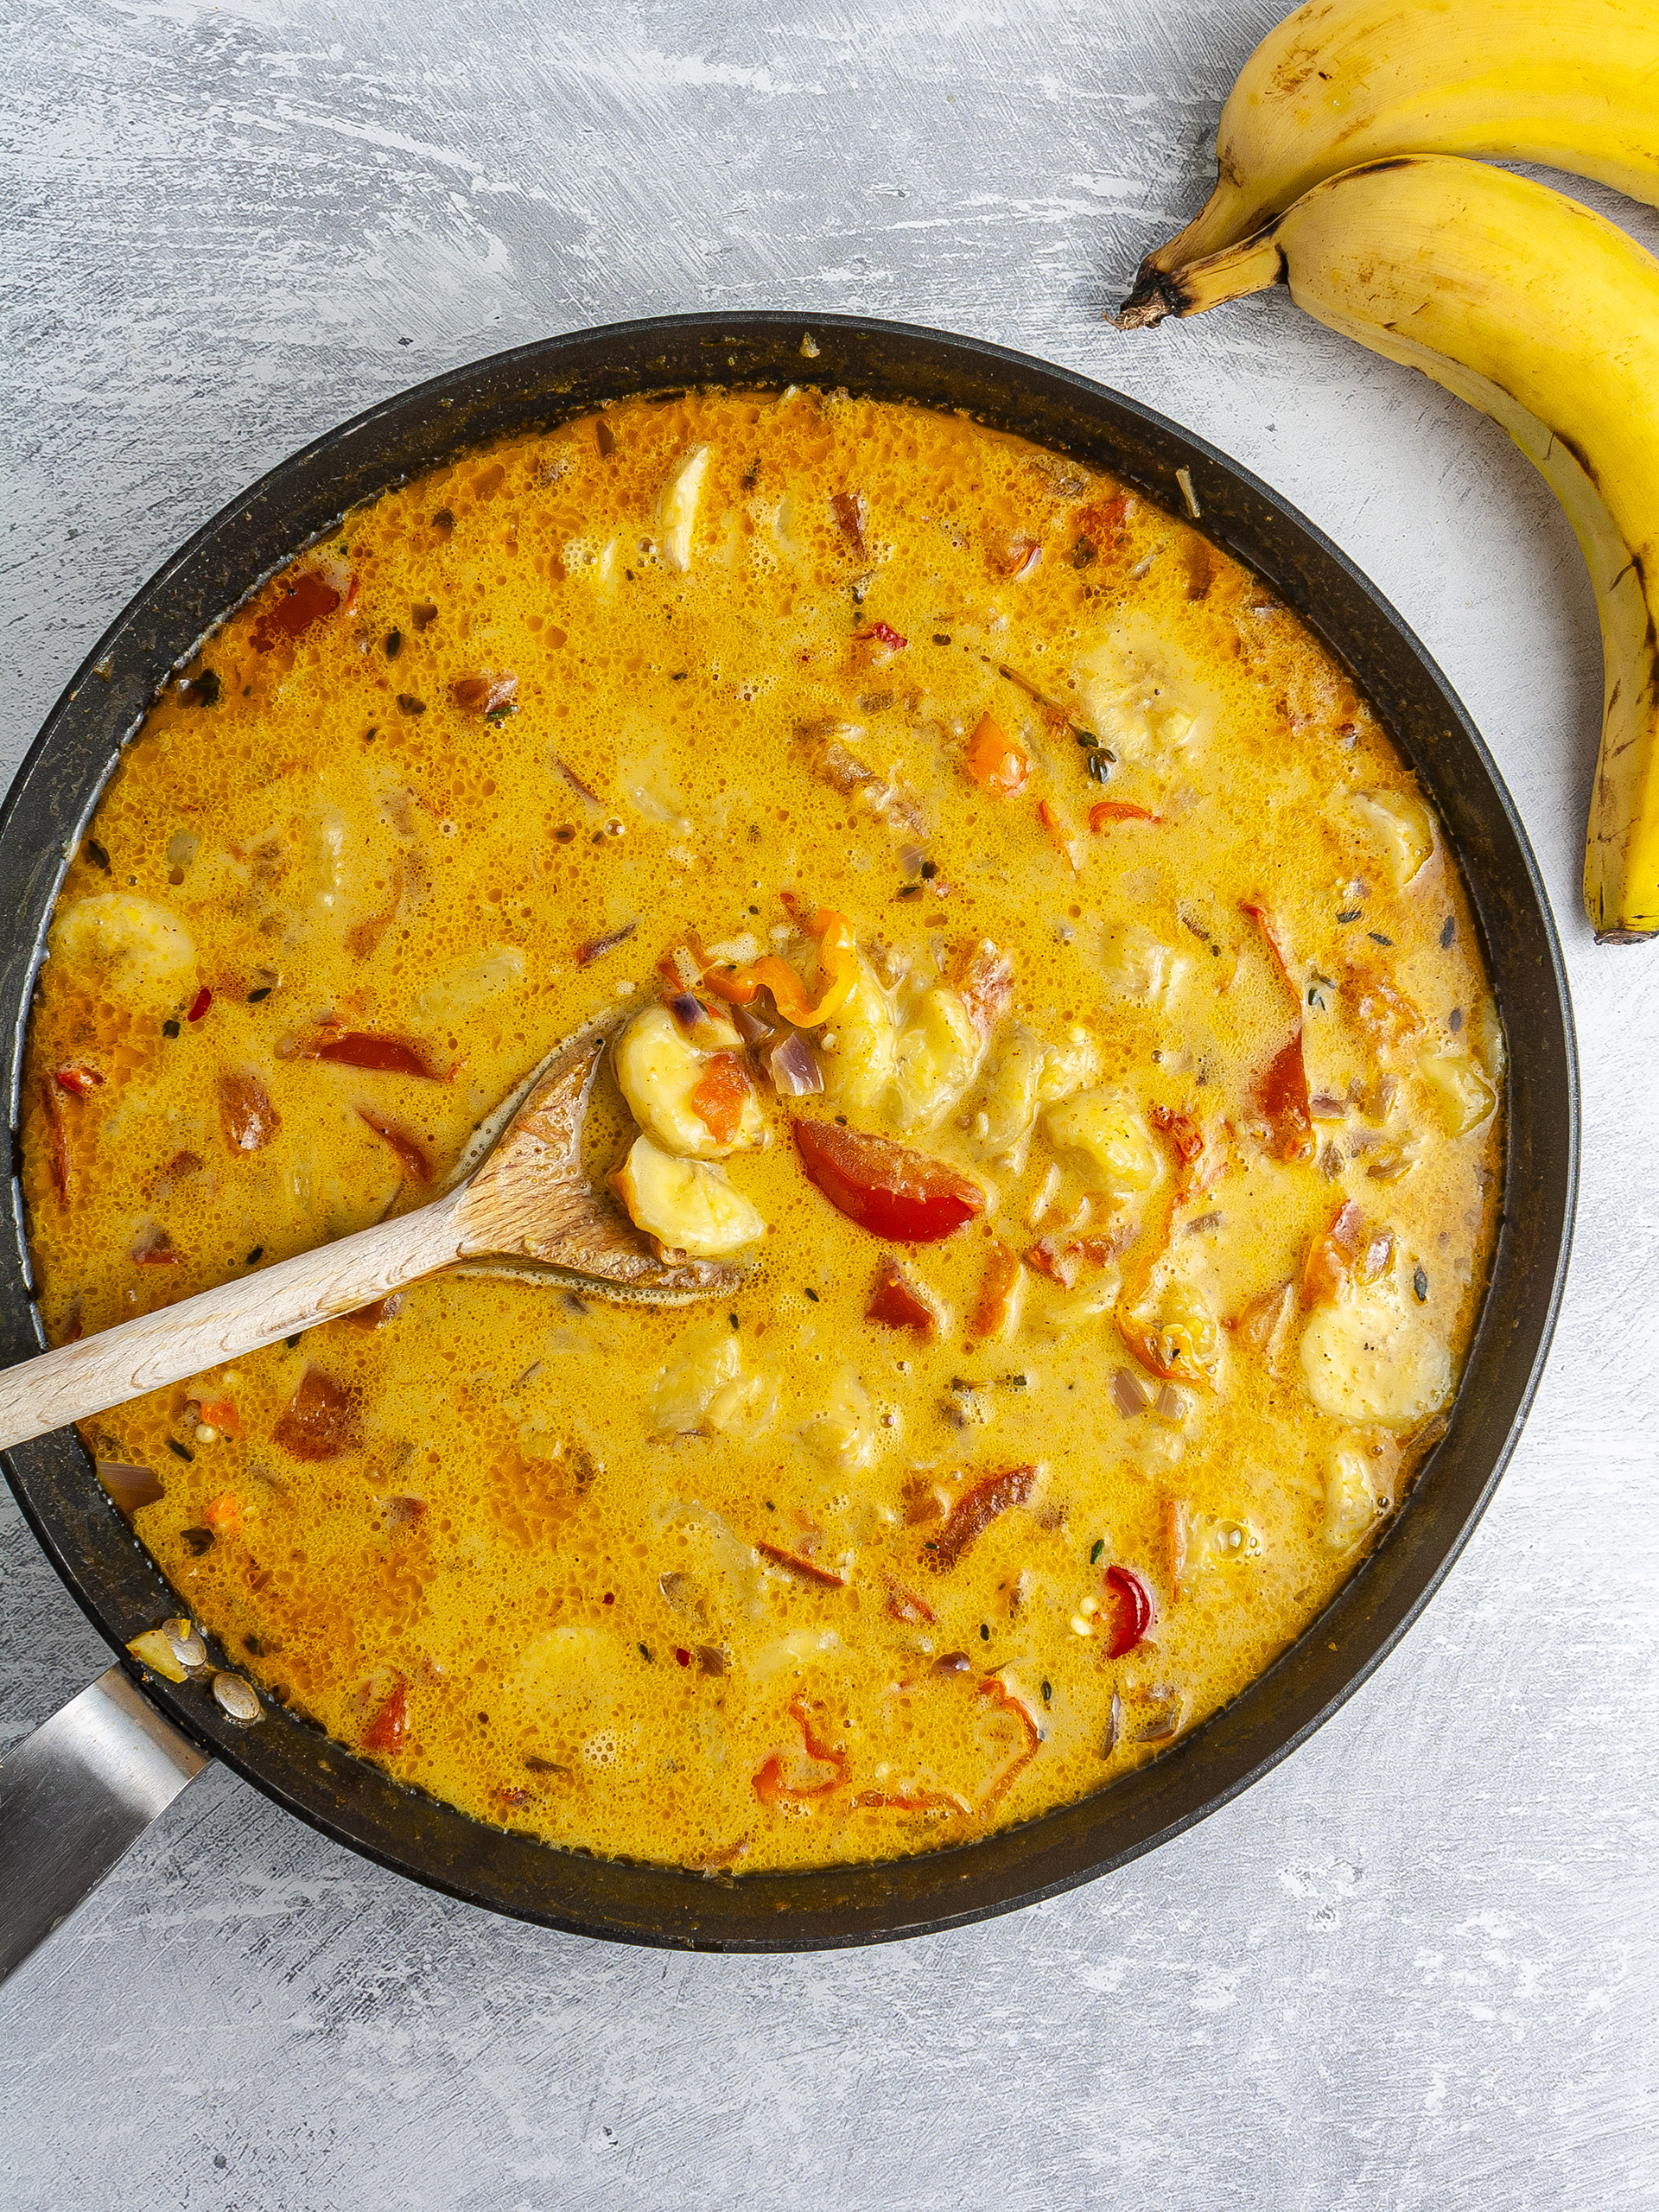 Sliced bananas added to the coconut curry